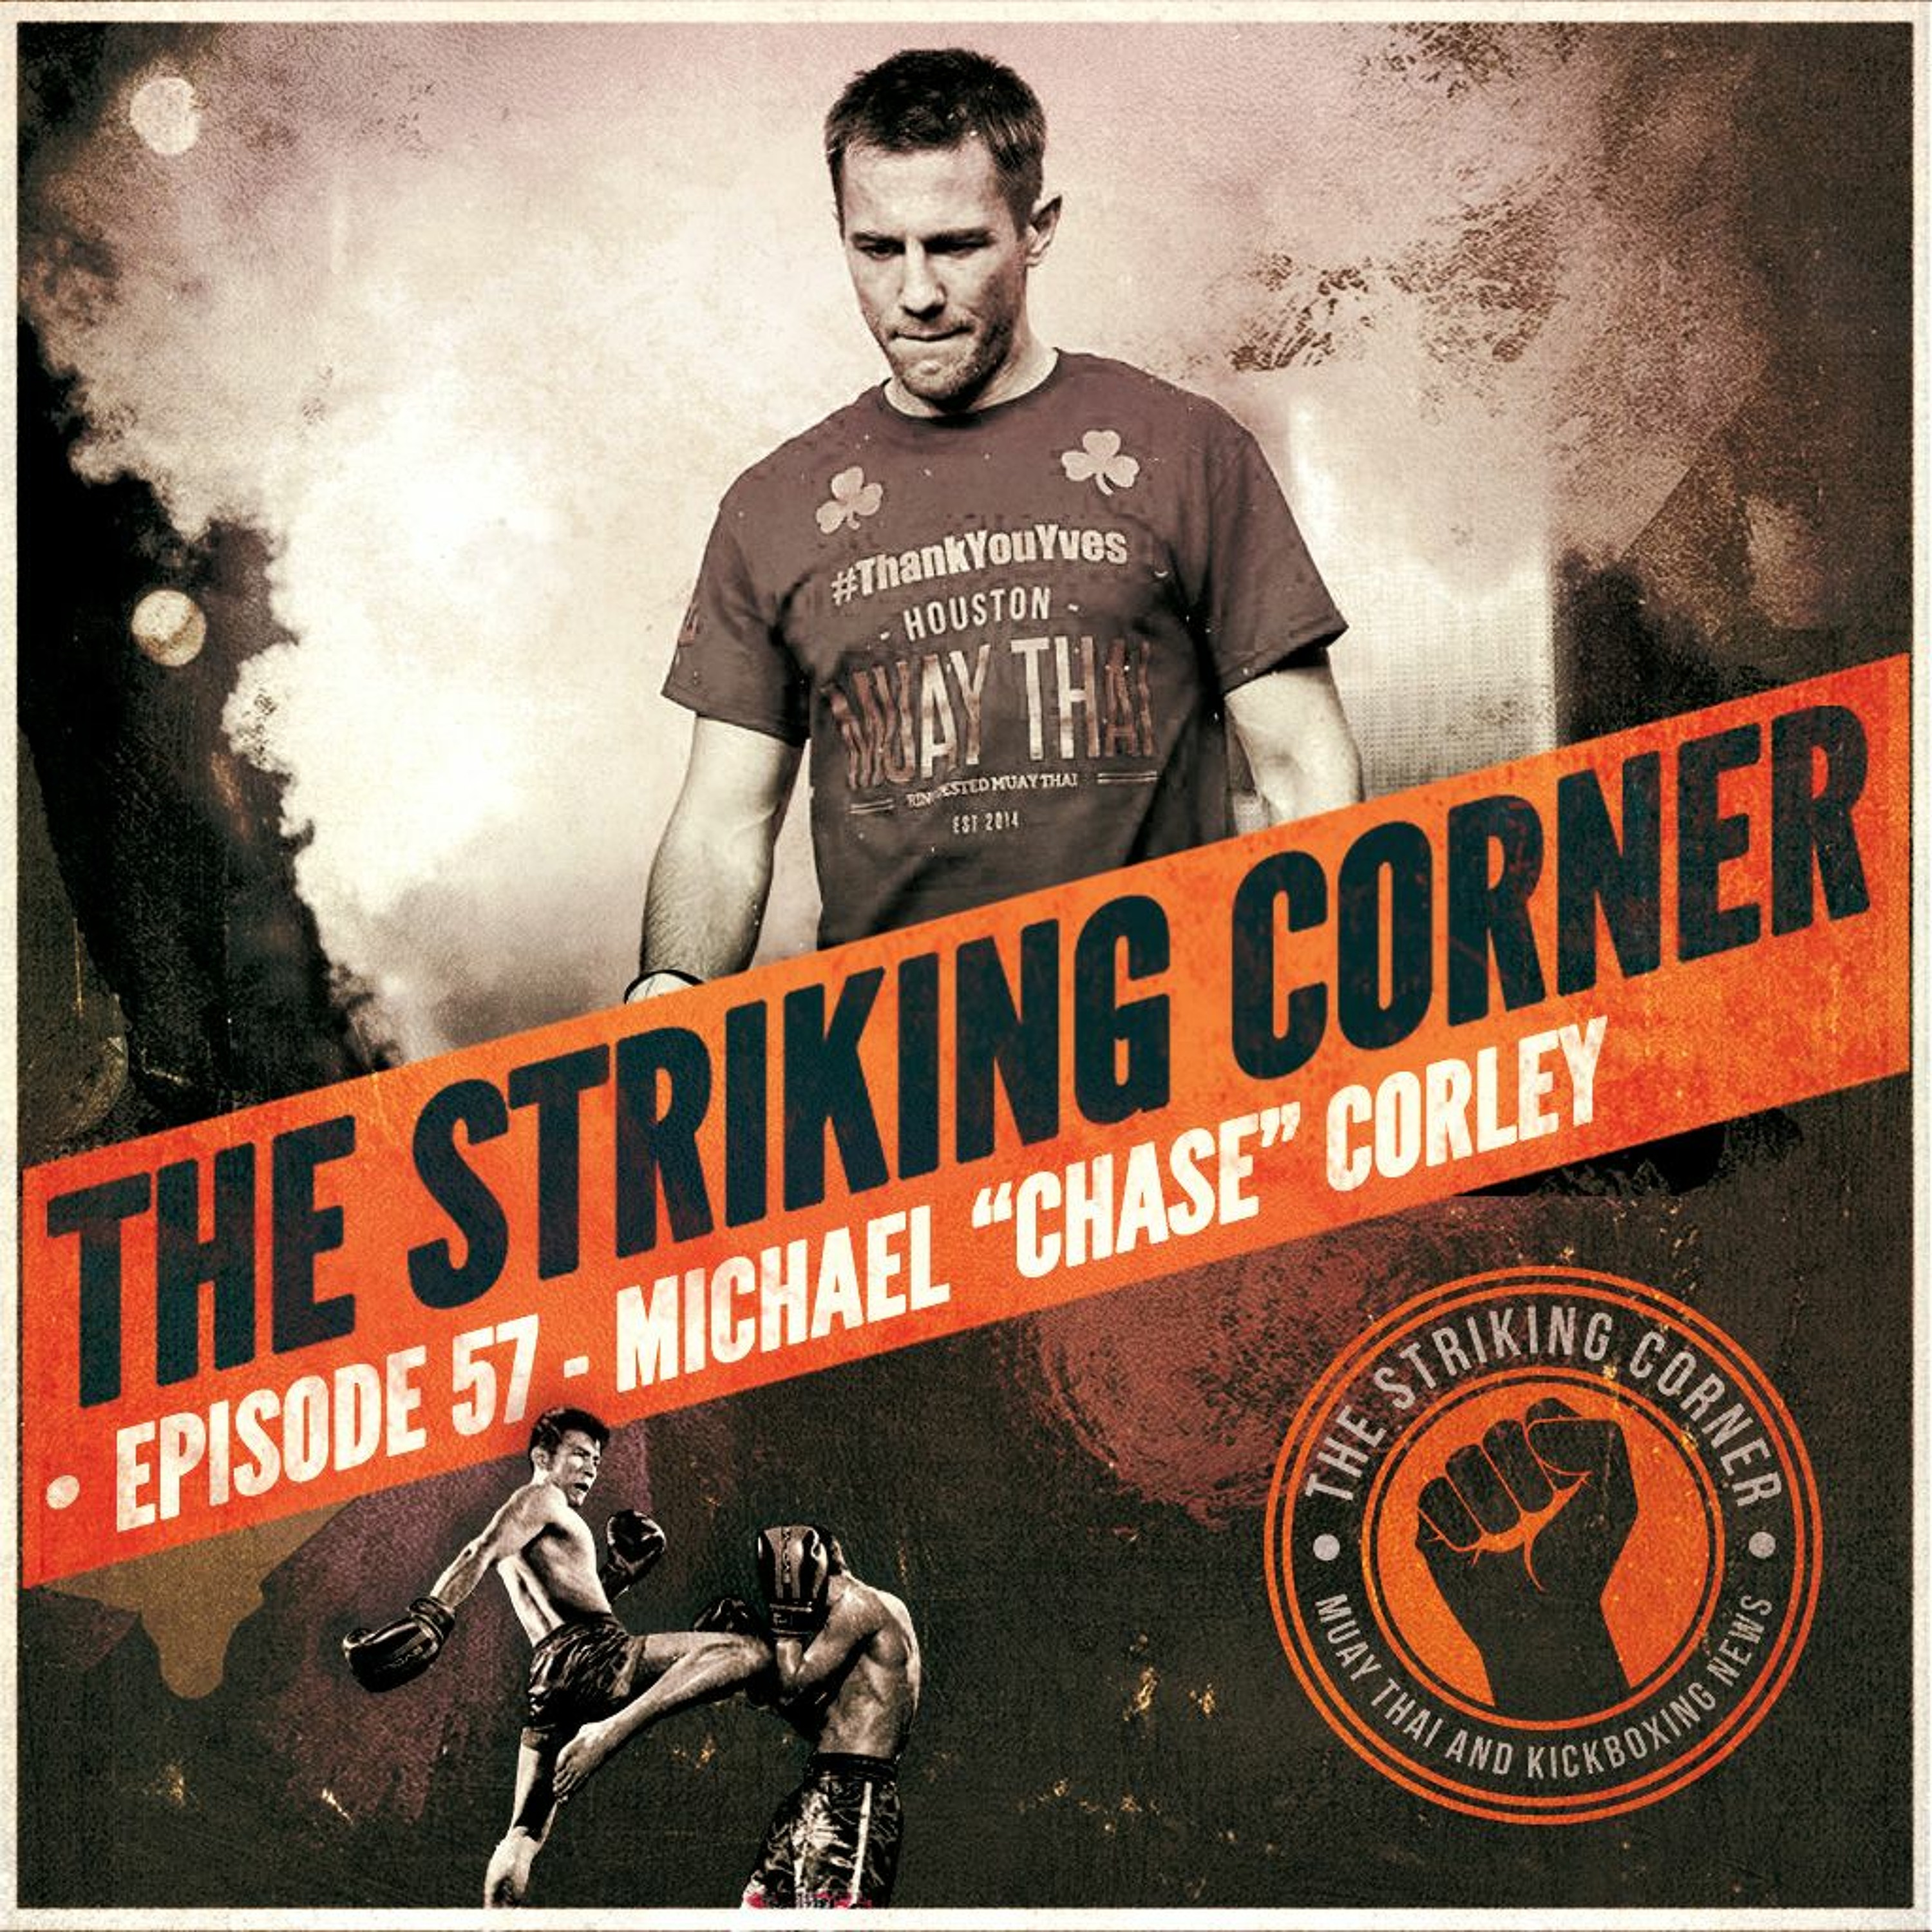 Ep. 57 feat. Michael Chase Corley